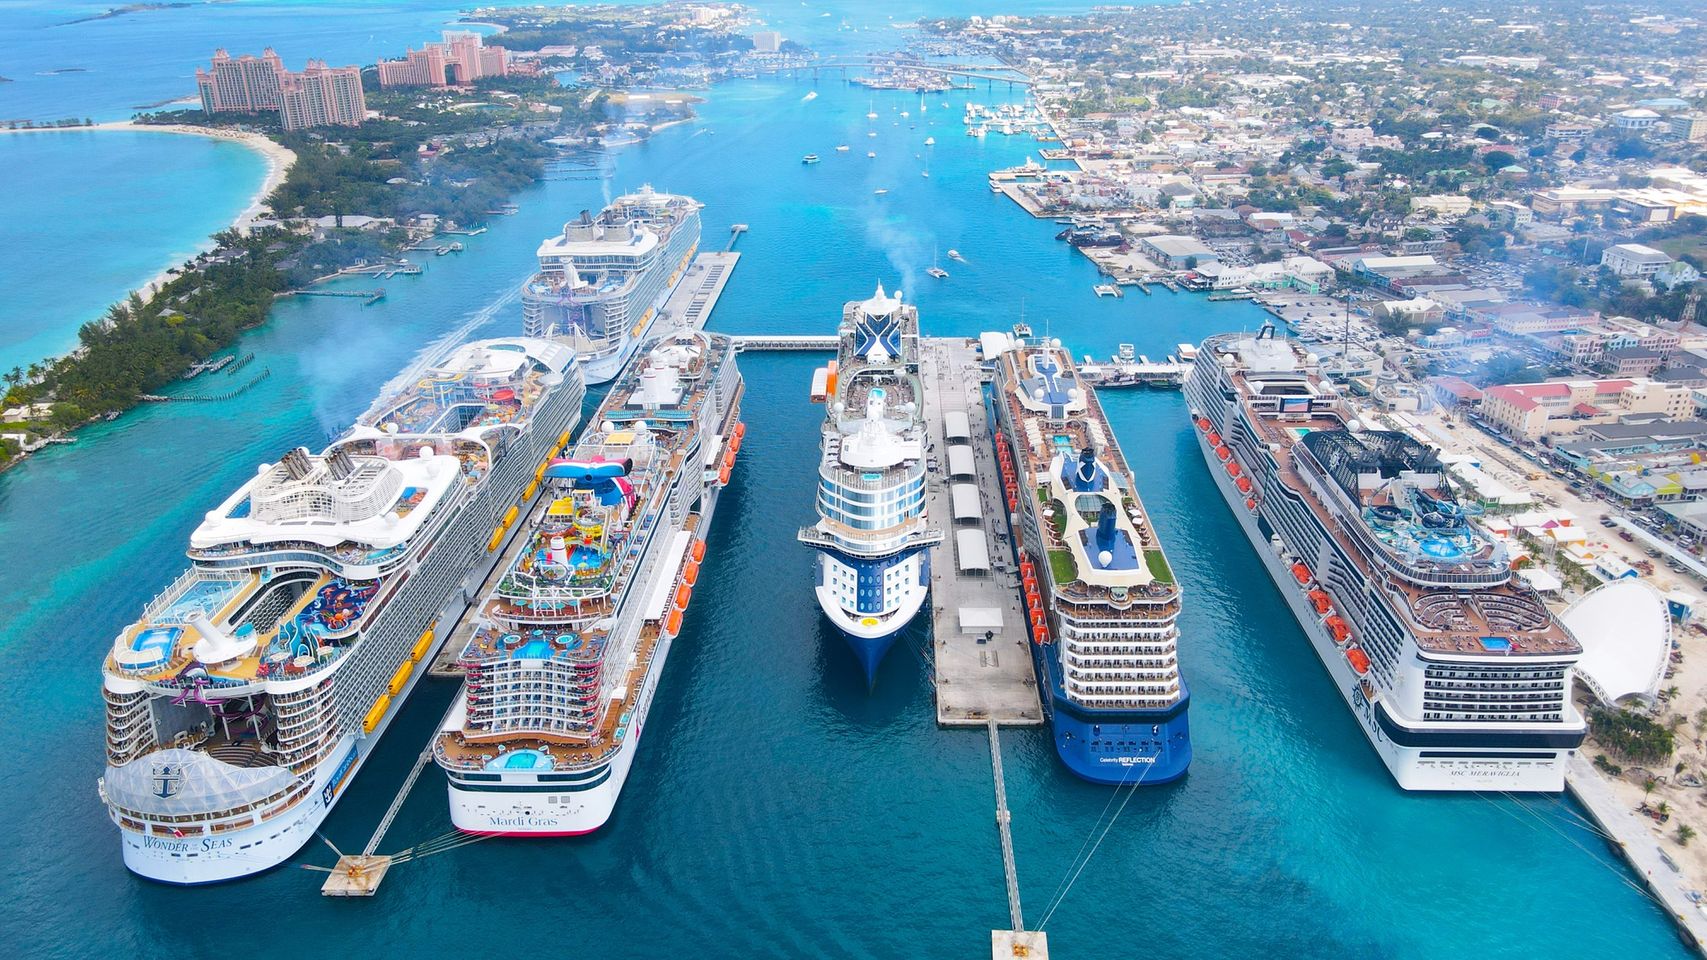 Nassau Cruise Port Sets New One Day Passenger Record of 28,554 Passengers by Shipping Telegraph